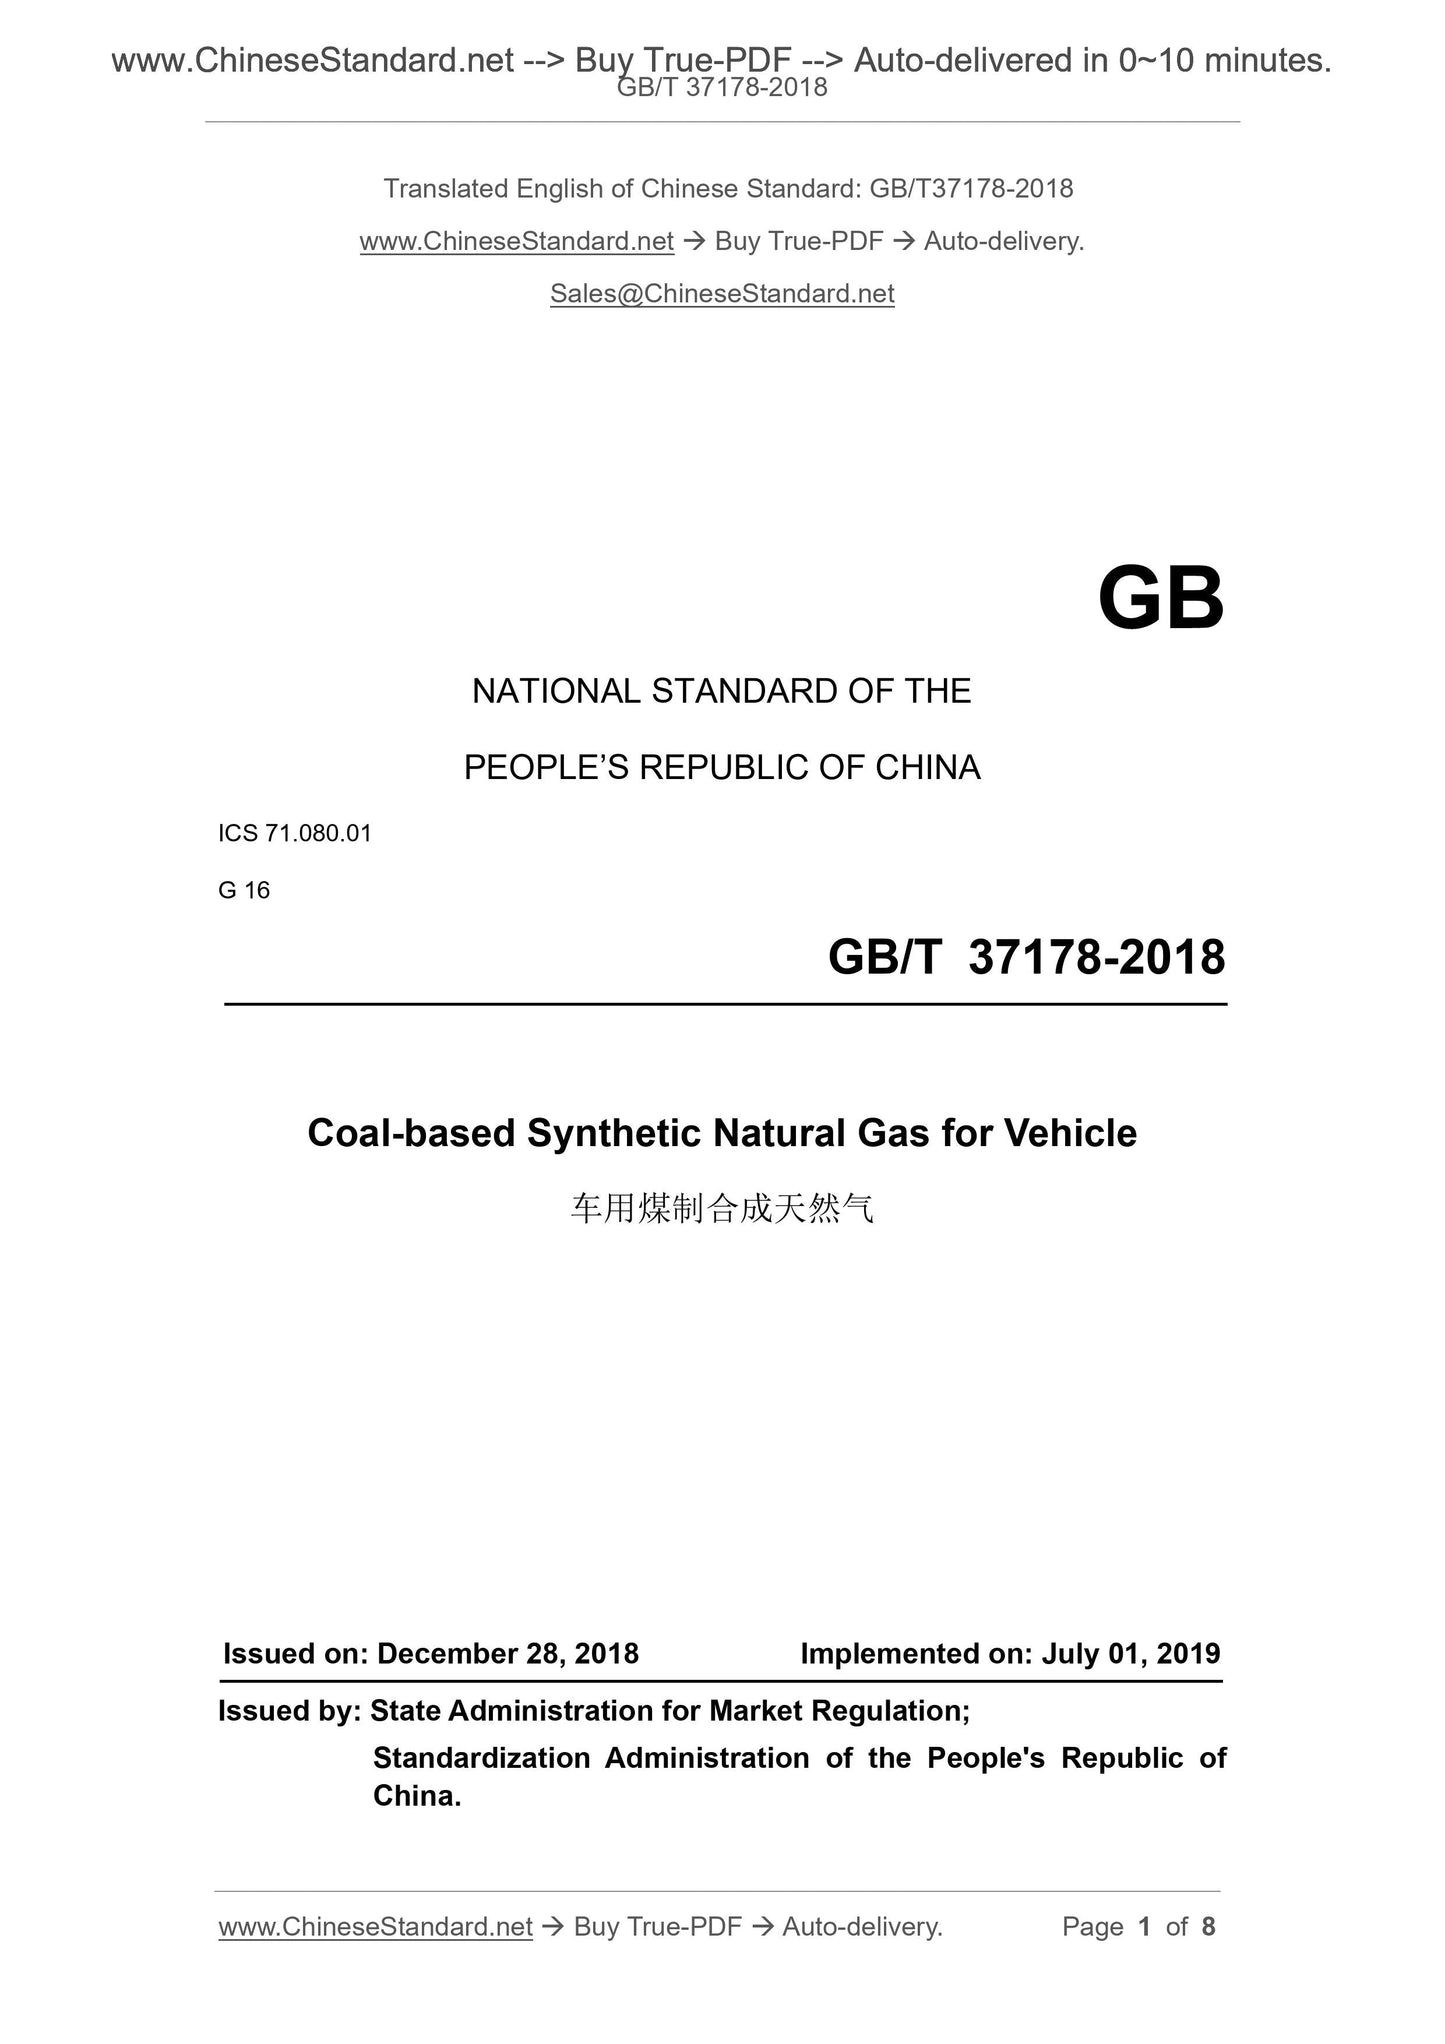 GB/T 37178-2018 Page 1